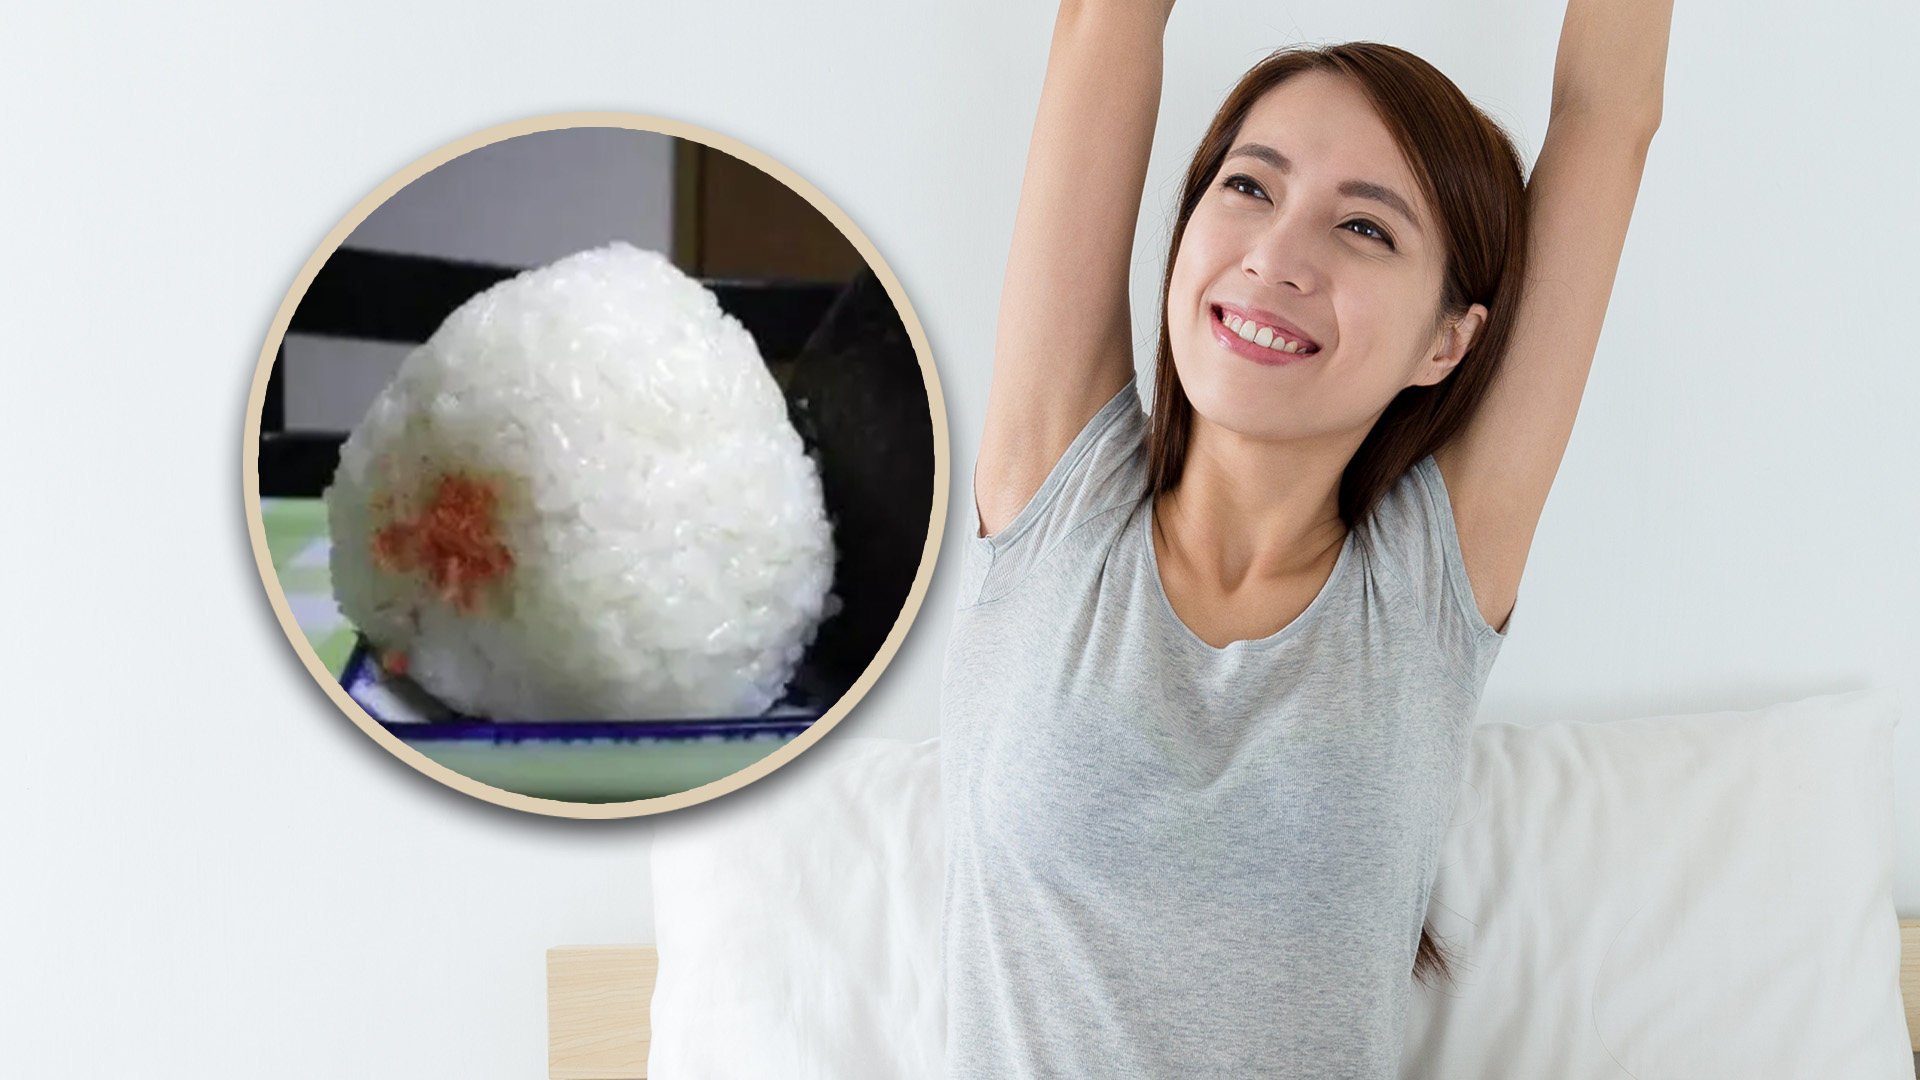 A classic Japanese snack, the rice ball, has taken on a new culinary form, which bizarrely involves the underarm sweat of the women who prepare it. Photo: SCMP composite/Shutterstock/QQ.com